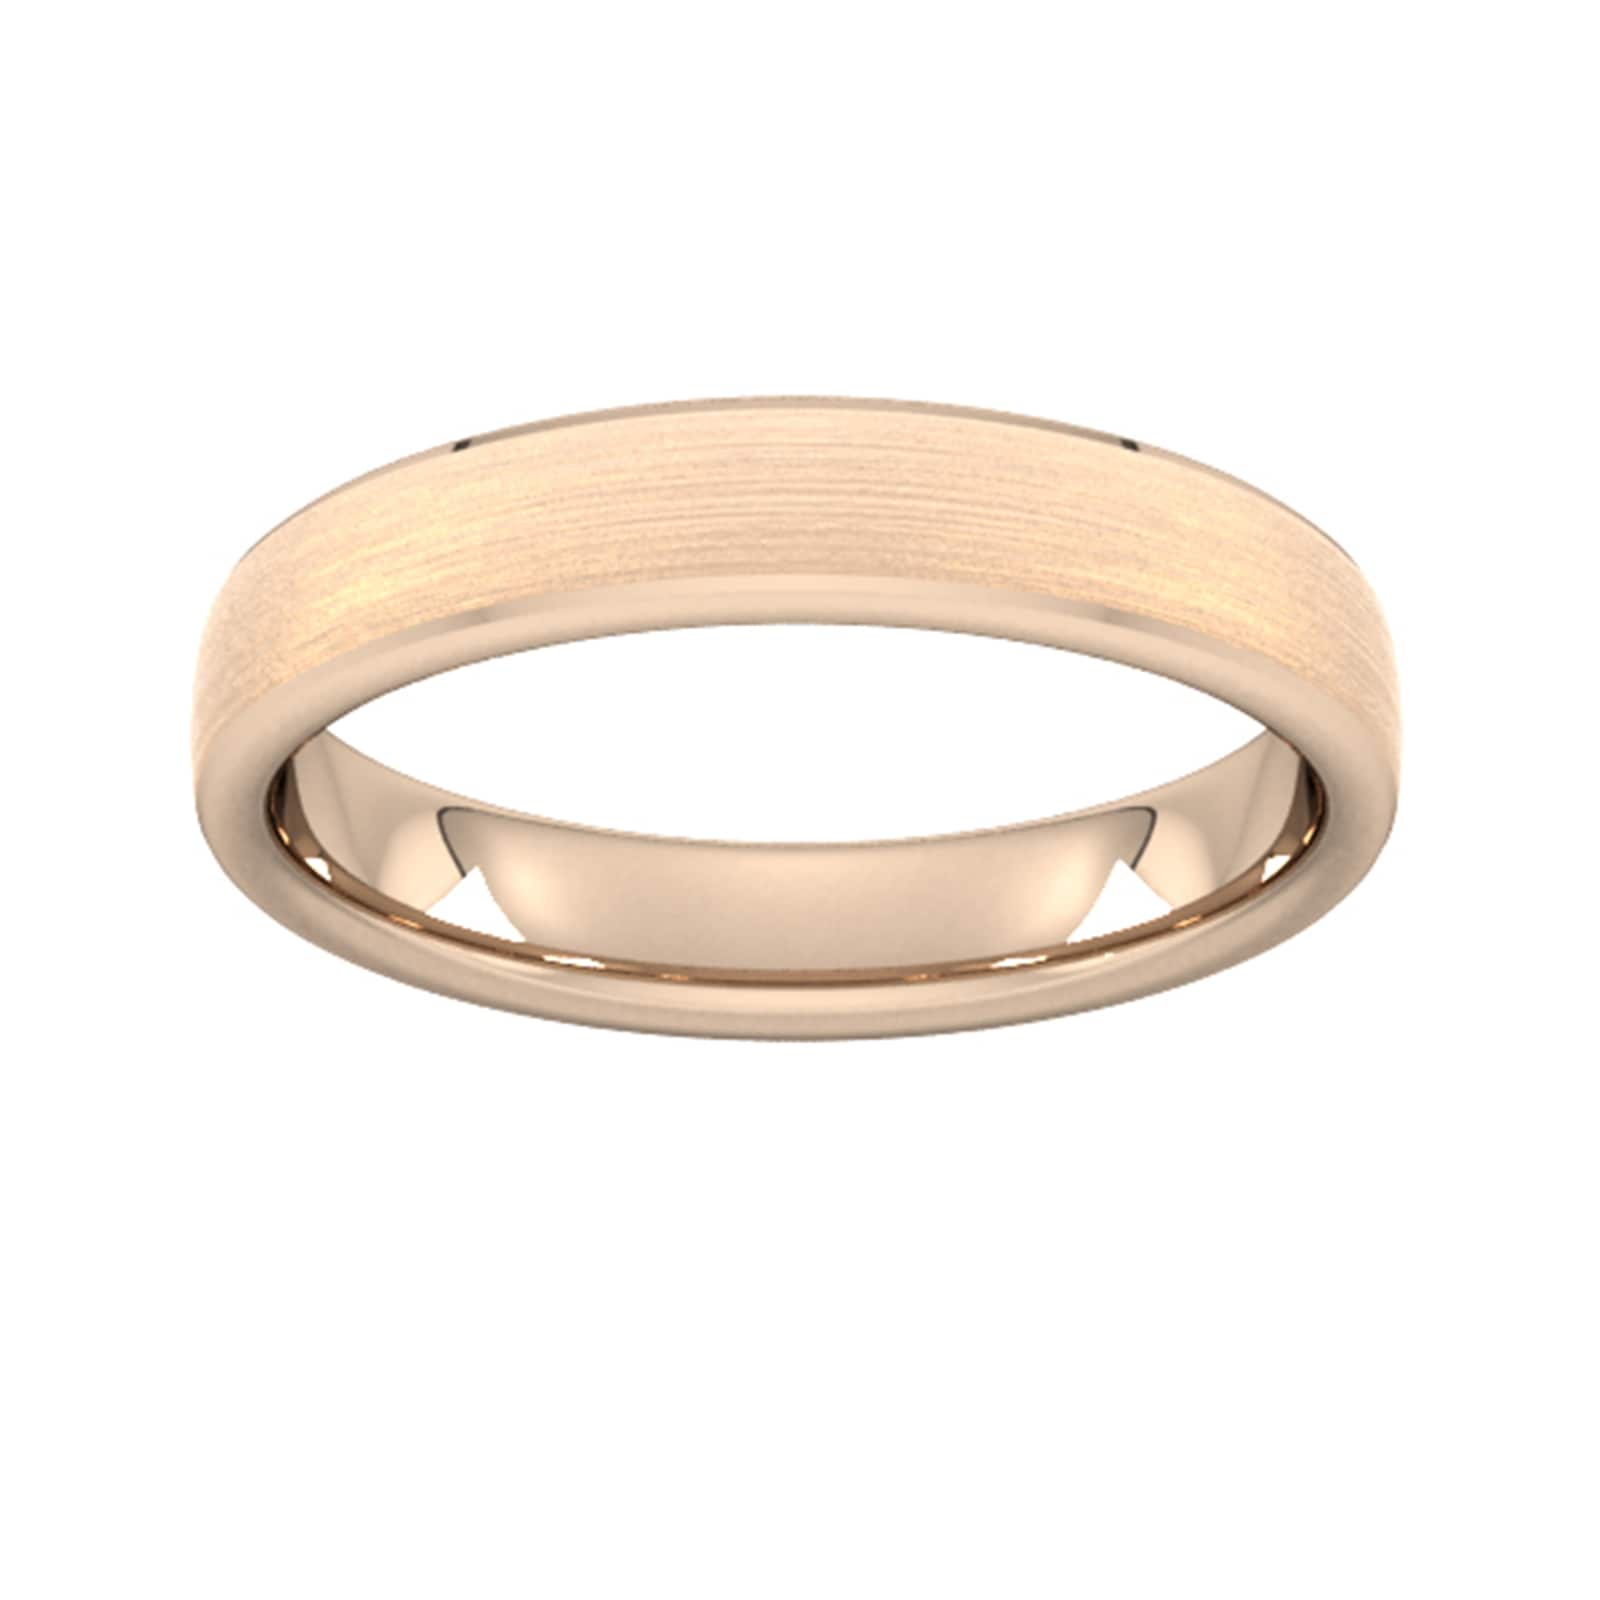 4mm Slight Court Standard Polished Chamfered Edges With Matt Centre Wedding Ring In 9 Carat Rose Gold - Ring Size T